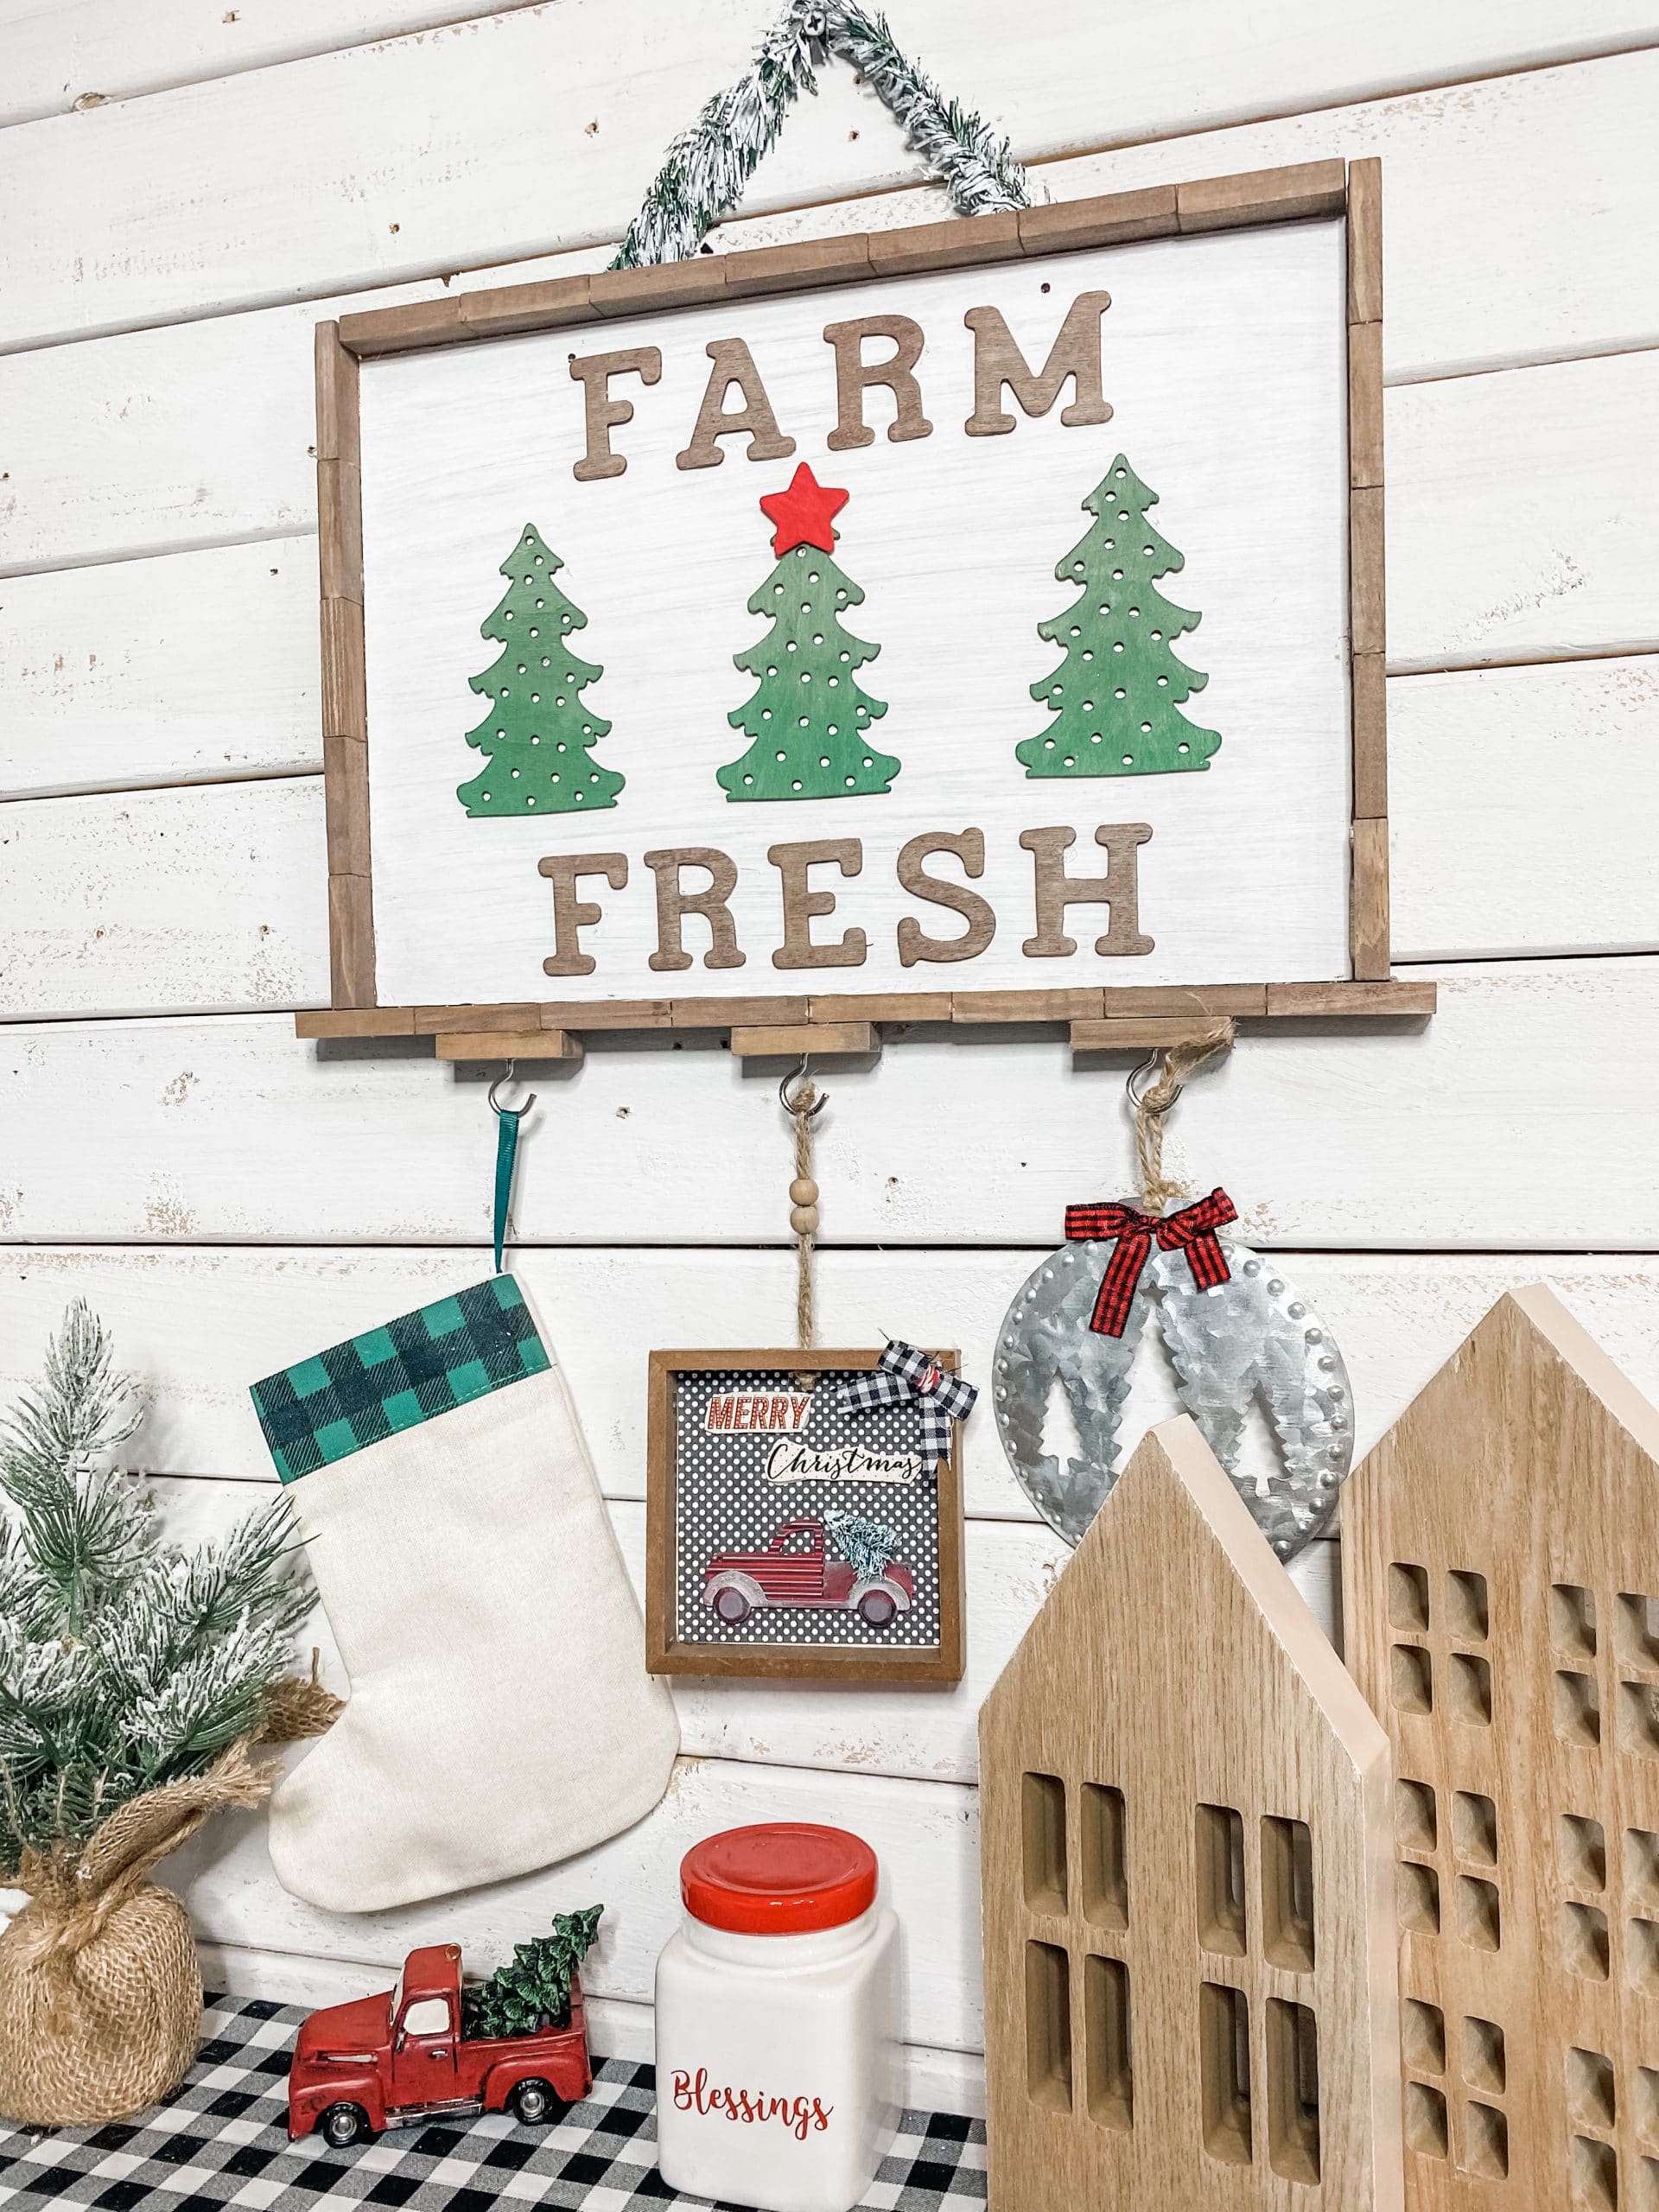 5 Cheap DIY Christmas Gifts From The Dollar Store Under $5